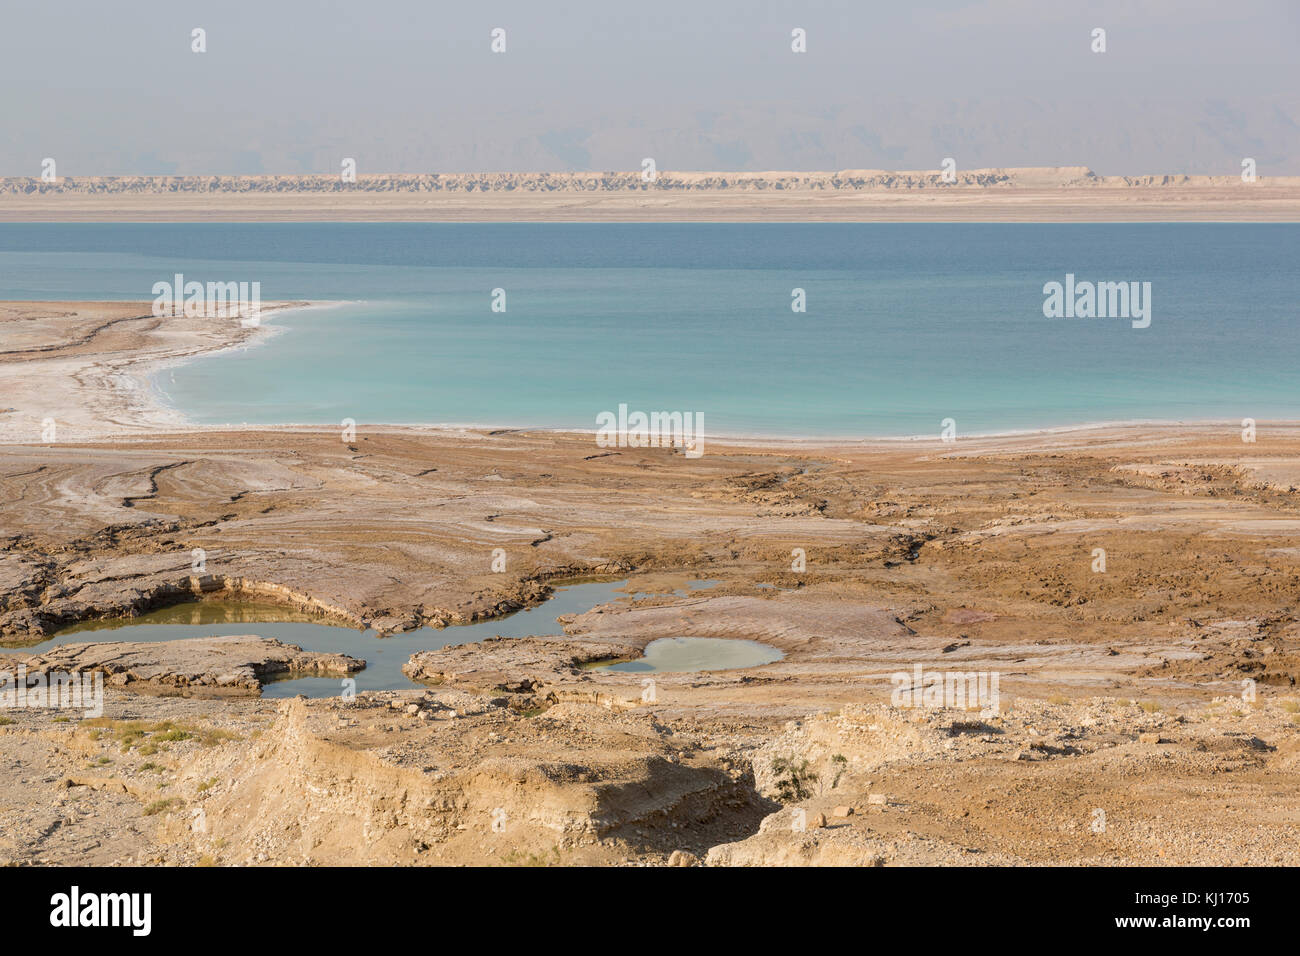 View on a pitfall, sinkholes and conversions of the Dead Sea coast, Jordan Stock Photo